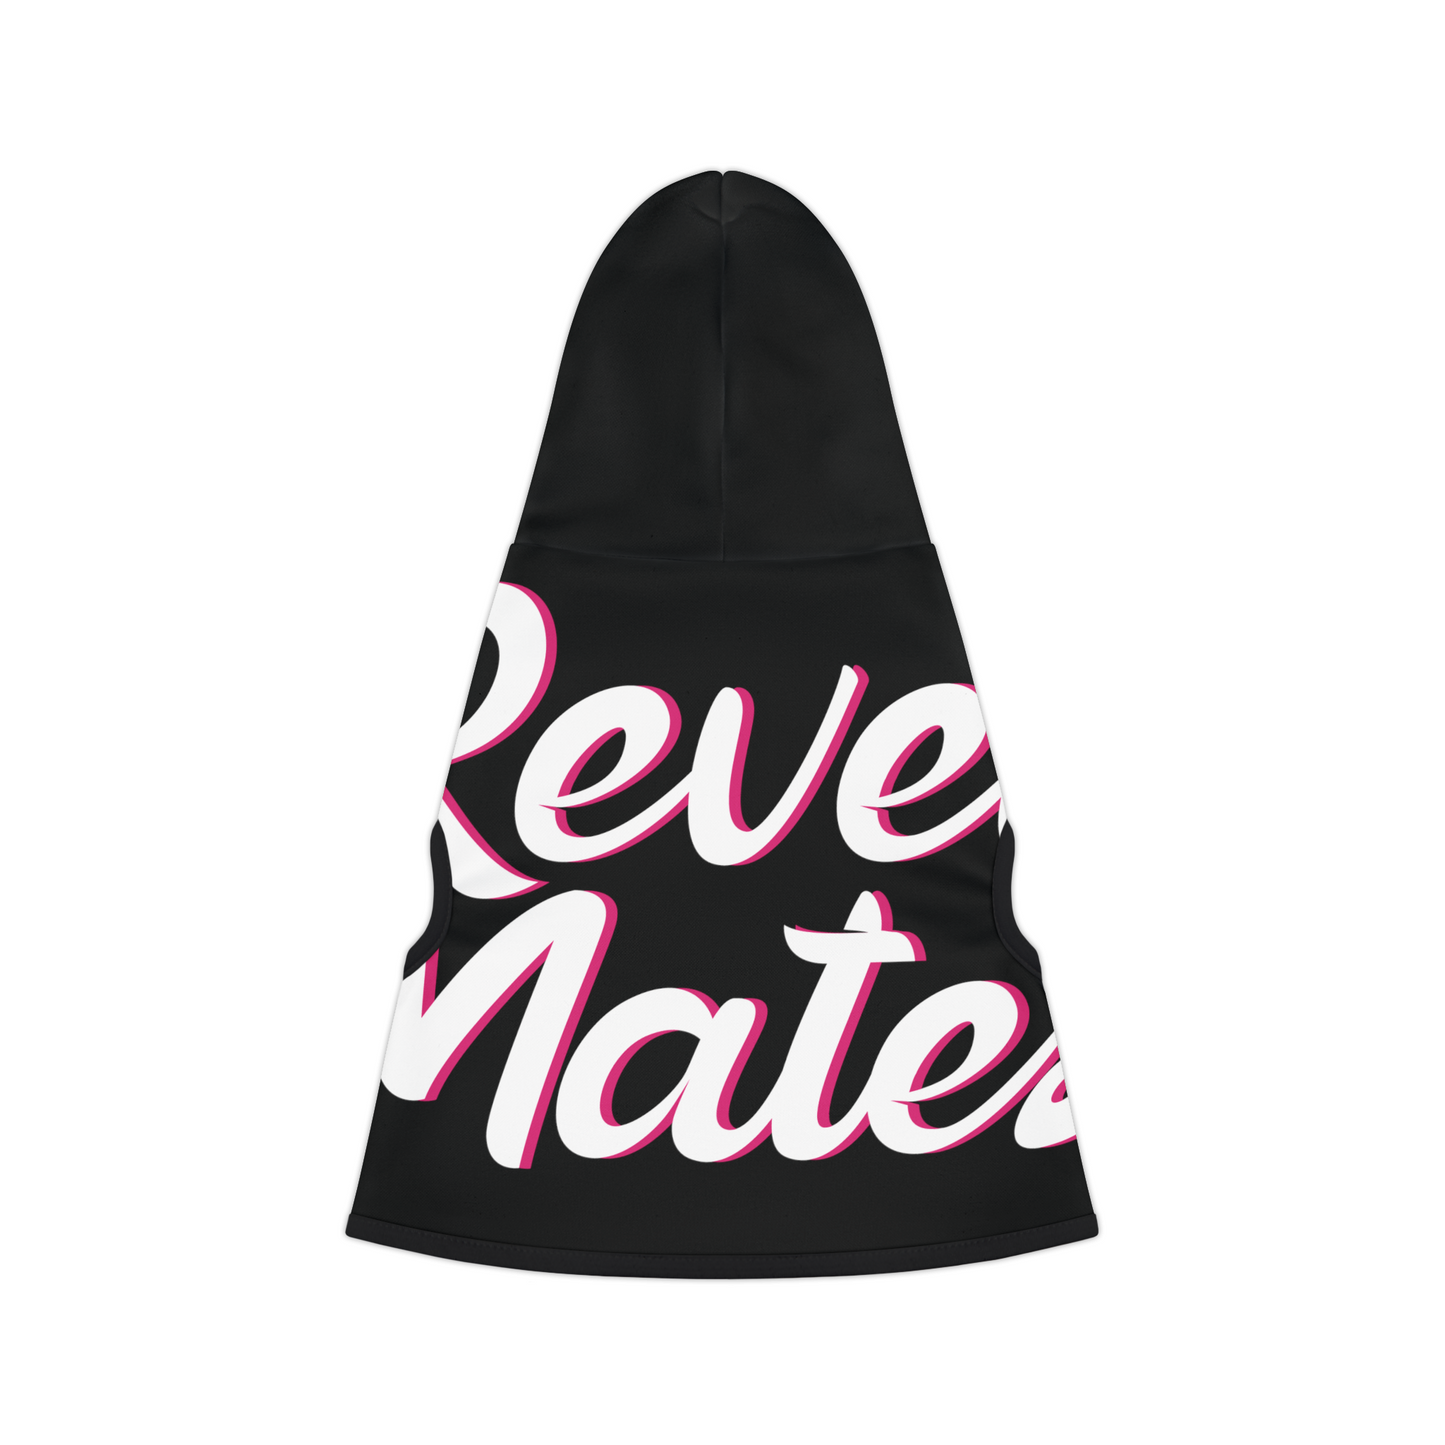 Pet Hoodie | for Dogs and Cats | Black & White RevelMates Design